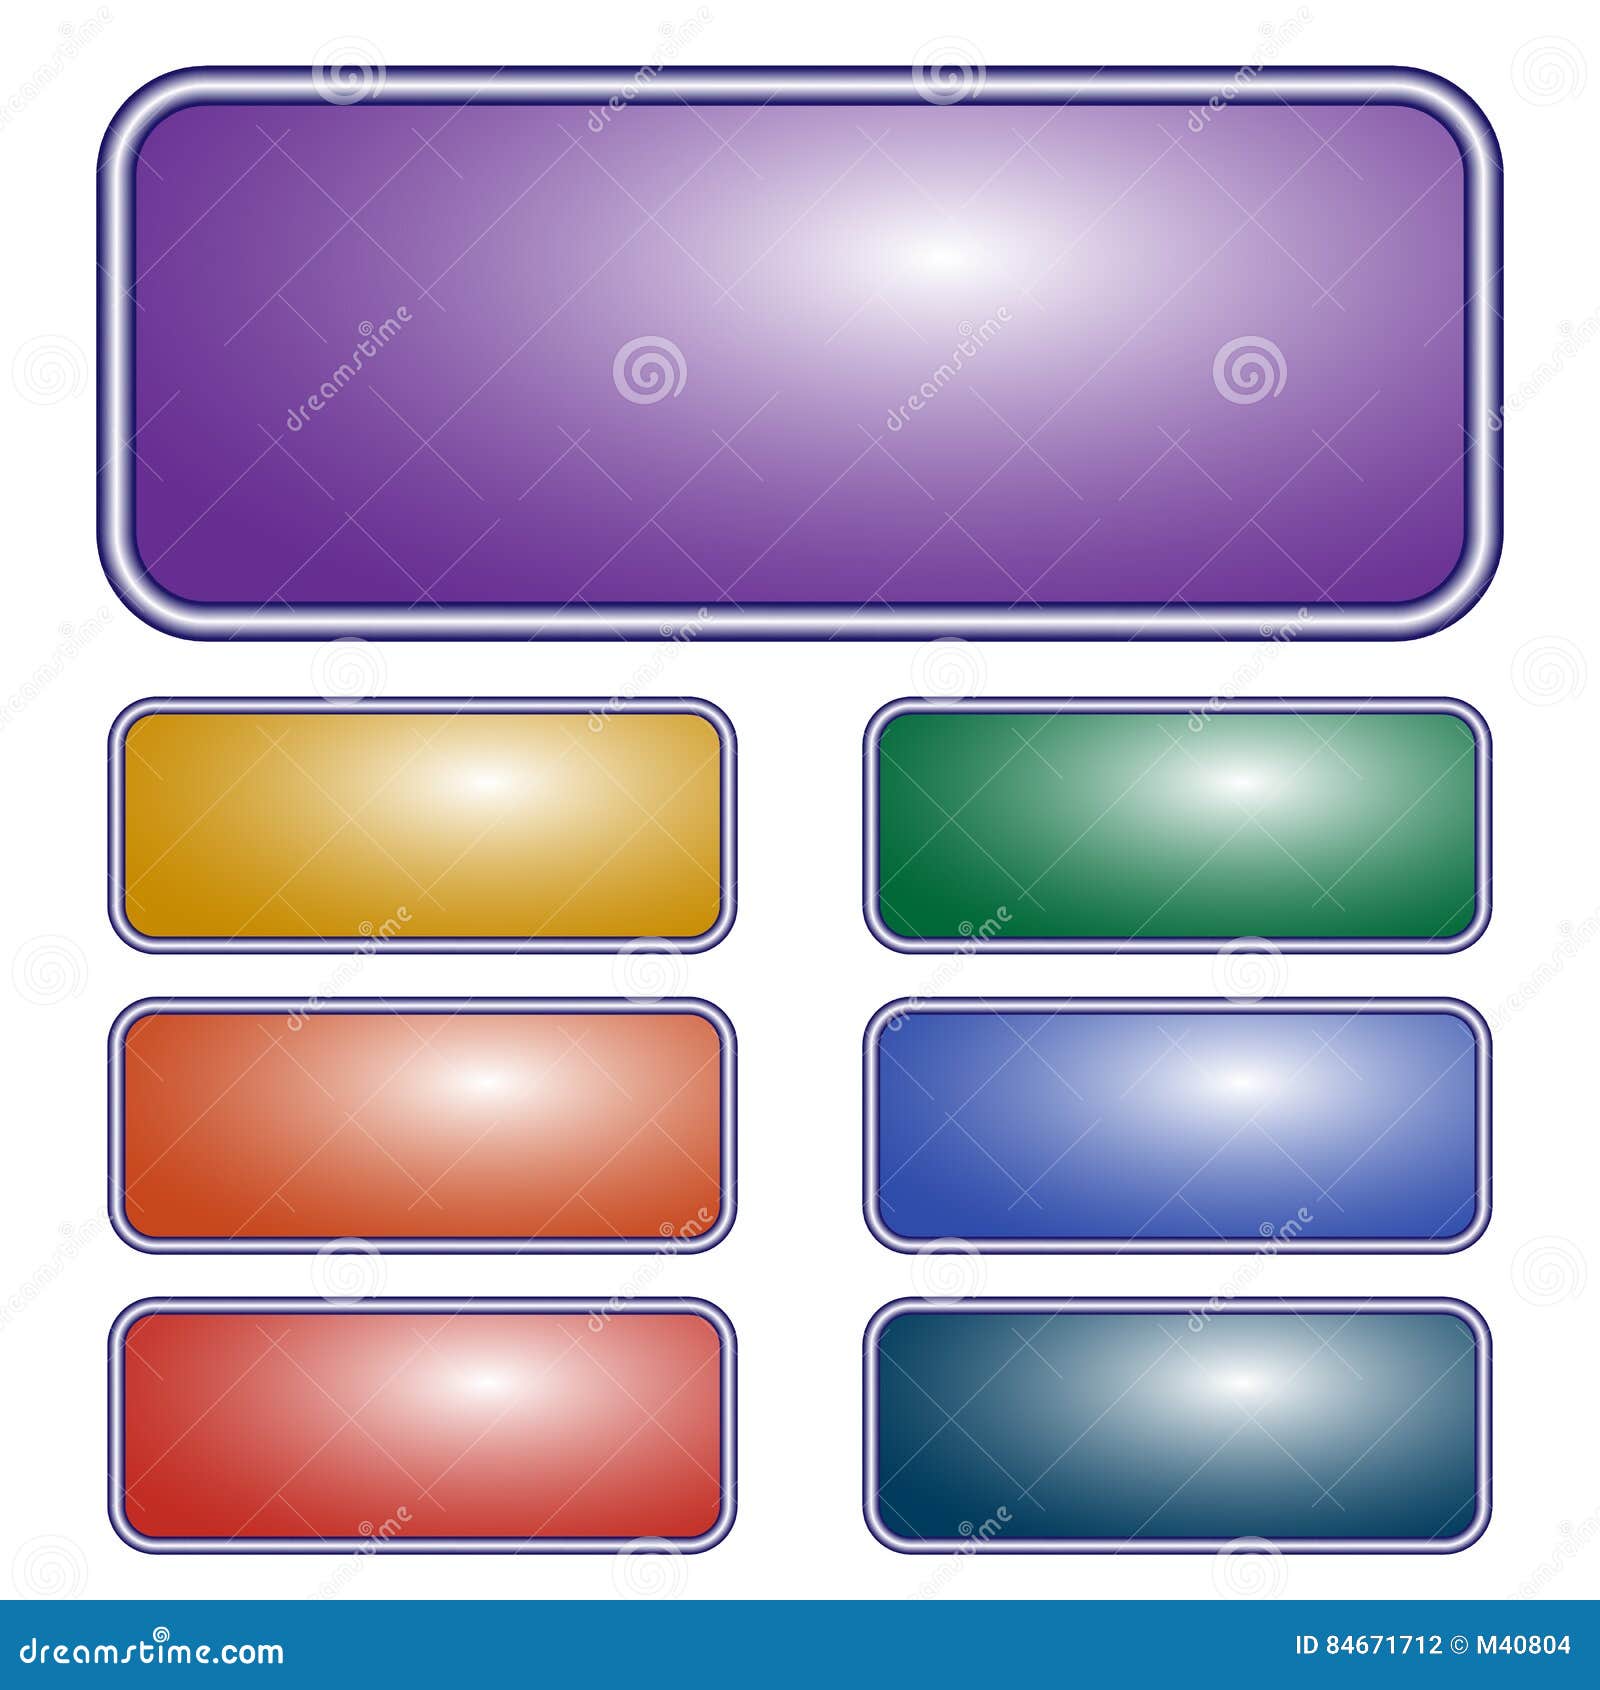 Free Vectors  Illustration set of colorful buttons